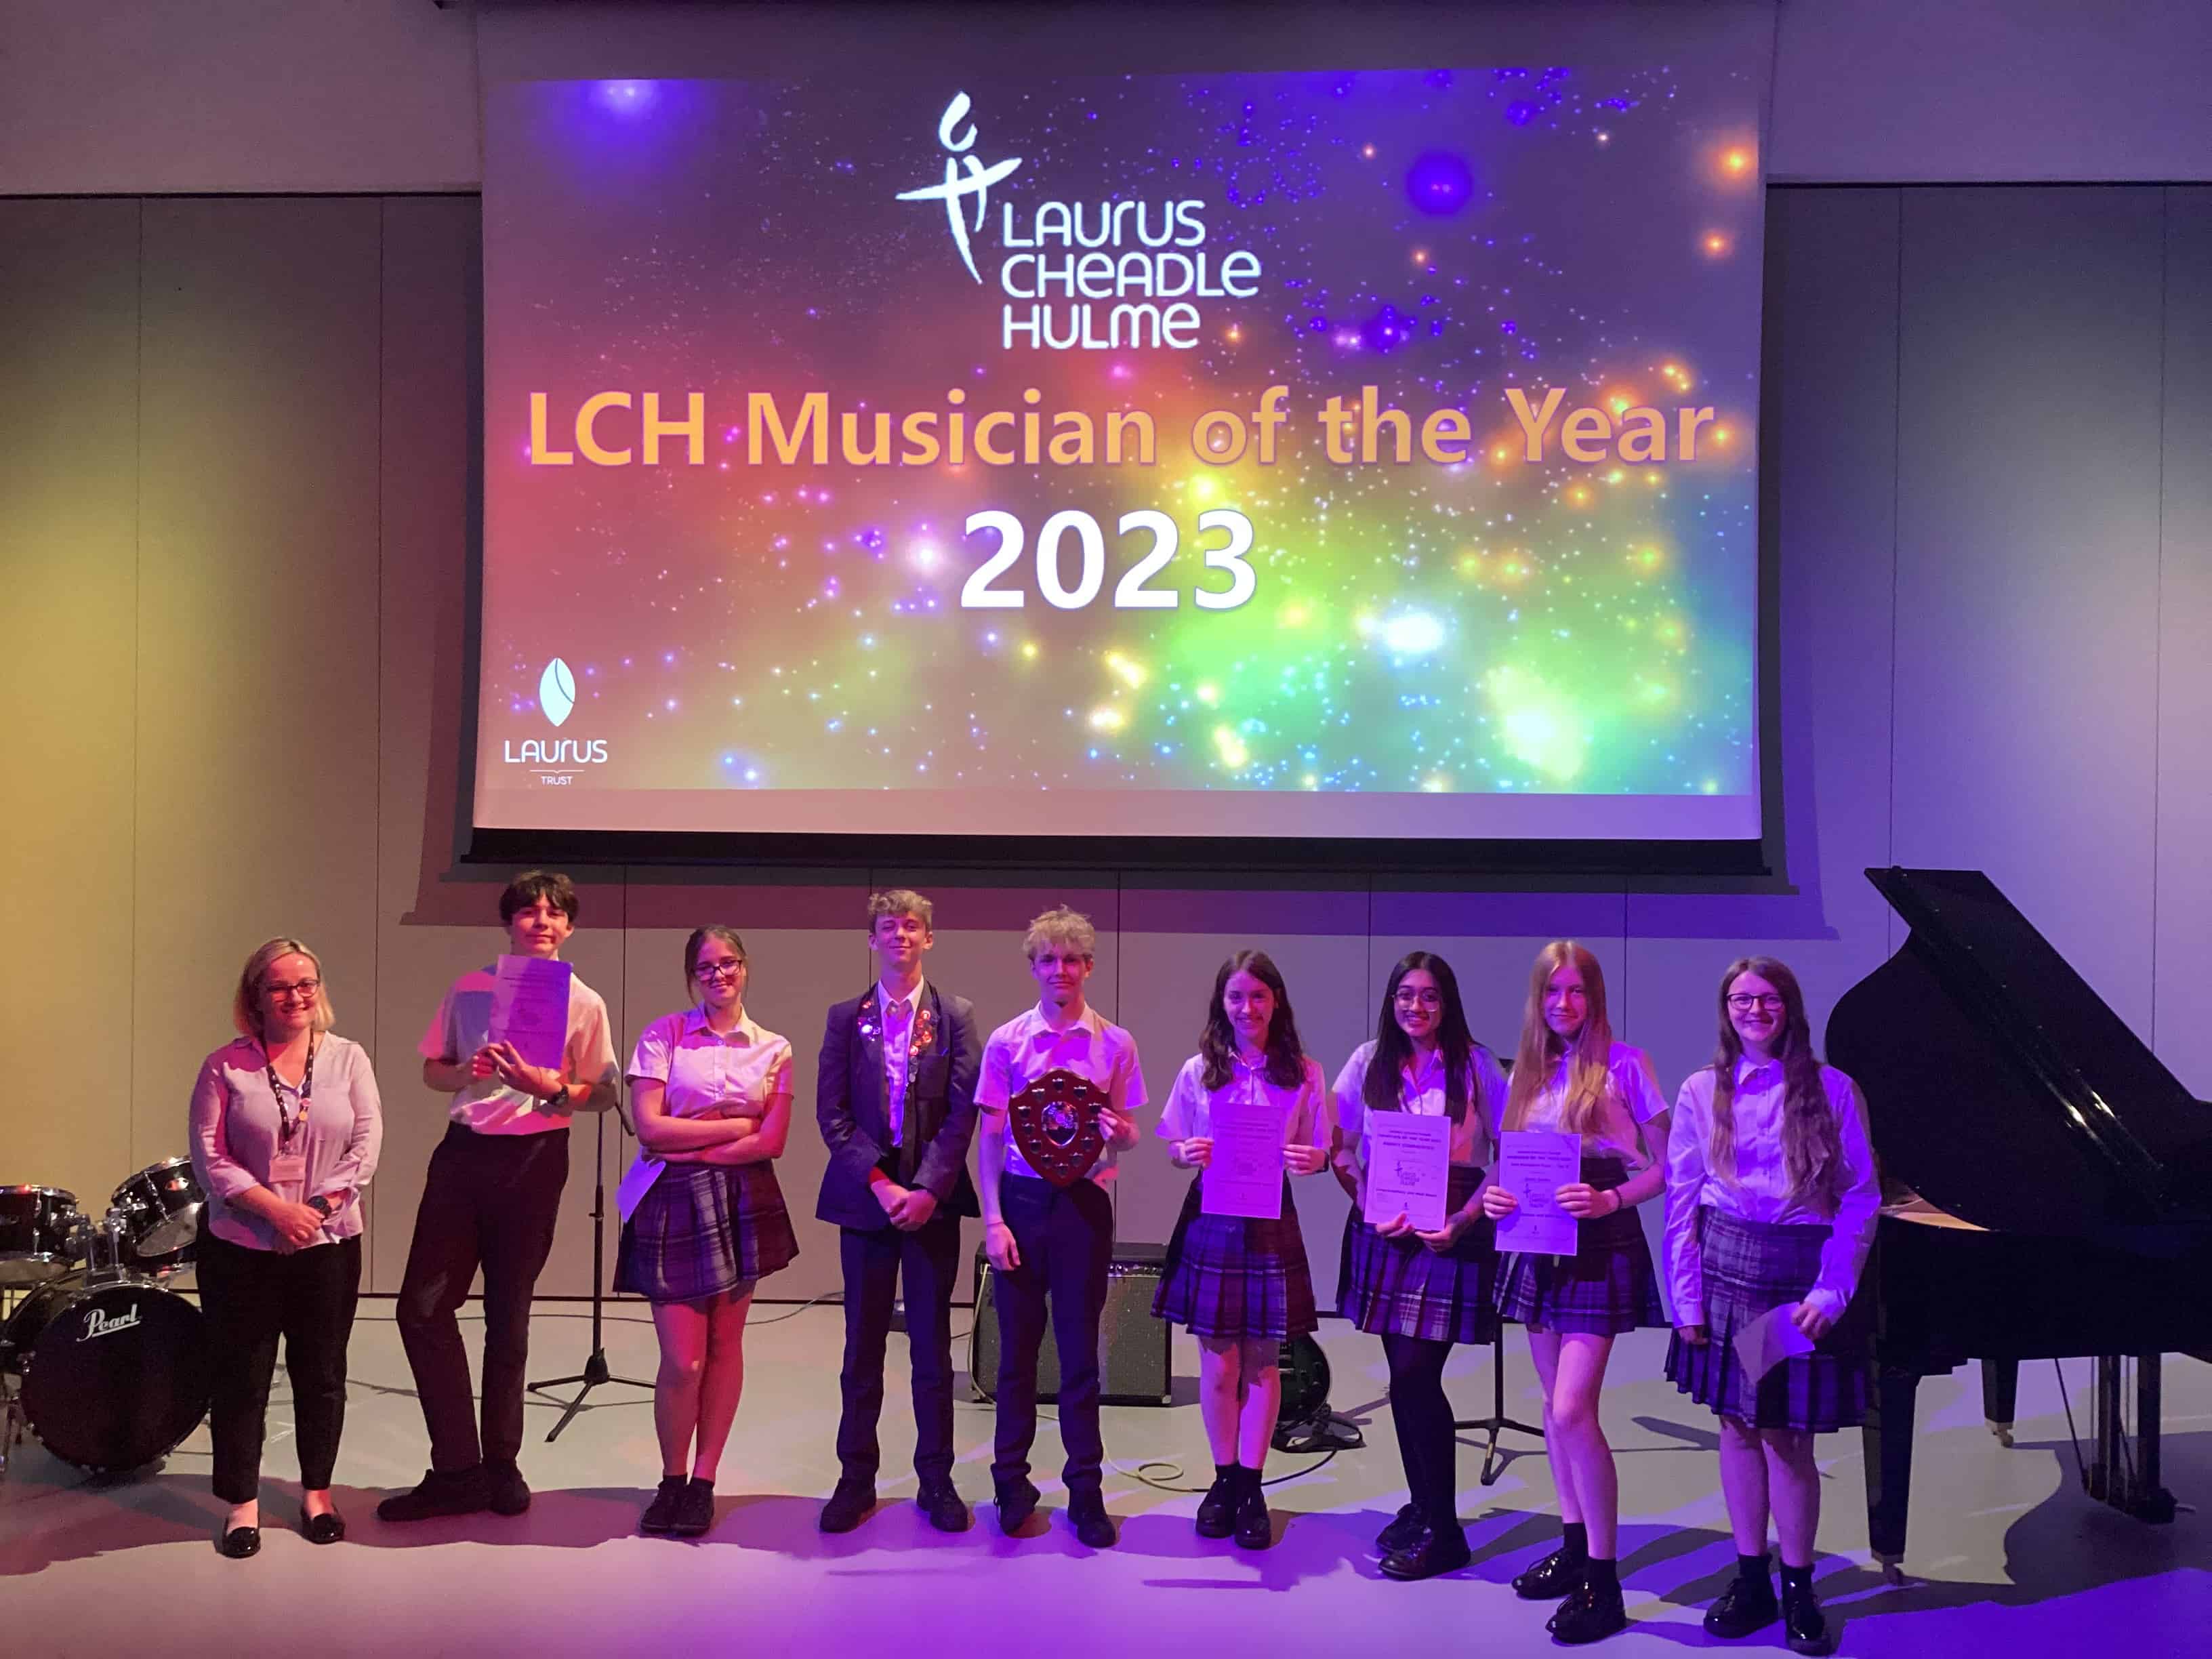 The 8 nominated performers in the Laurus Cheadle Hulme Musician of the Year competition 2023 stand next to Miss Brown (Trust Director of Music) on the stage in purple stage lighting. Behind them, a projector screen says LCH Musician of the Year 2023.